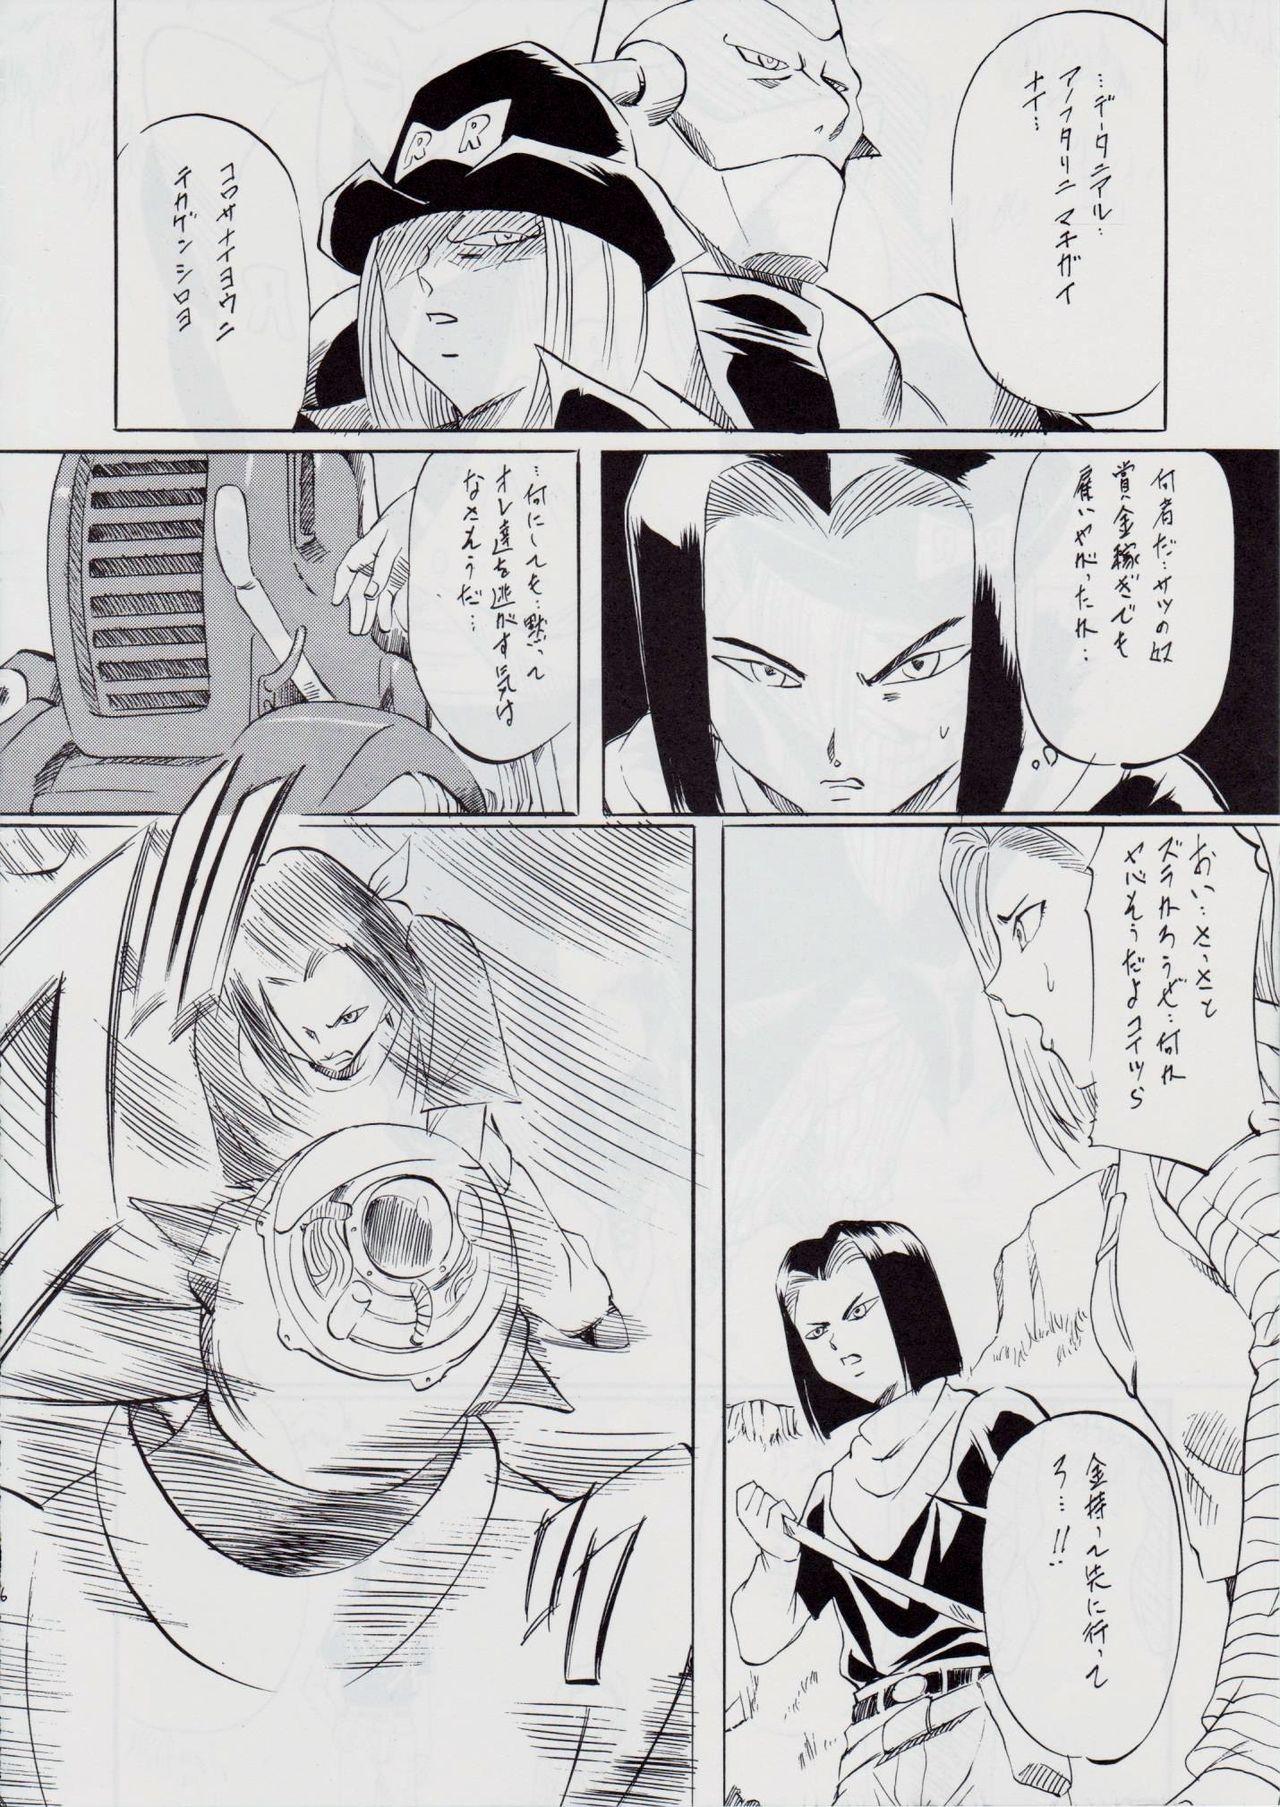 Best Blowjob Ever ONE-EIGHT - Dragon ball z Point Of View - Page 5